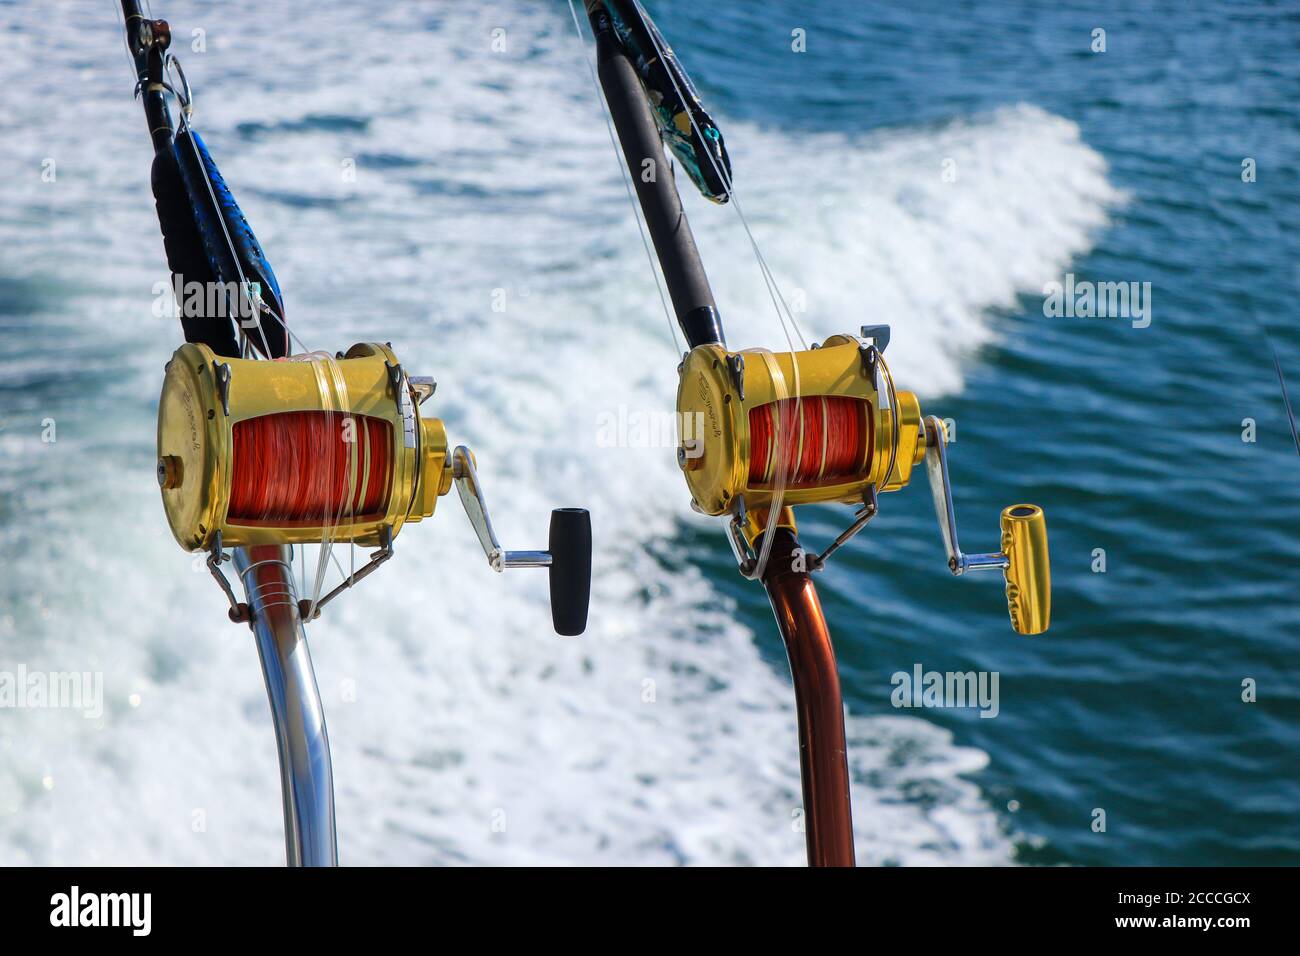 Fishing Rods On A Yacht For Marlin Fishing Stock Photo, Picture and Royalty  Free Image. Image 47356916.